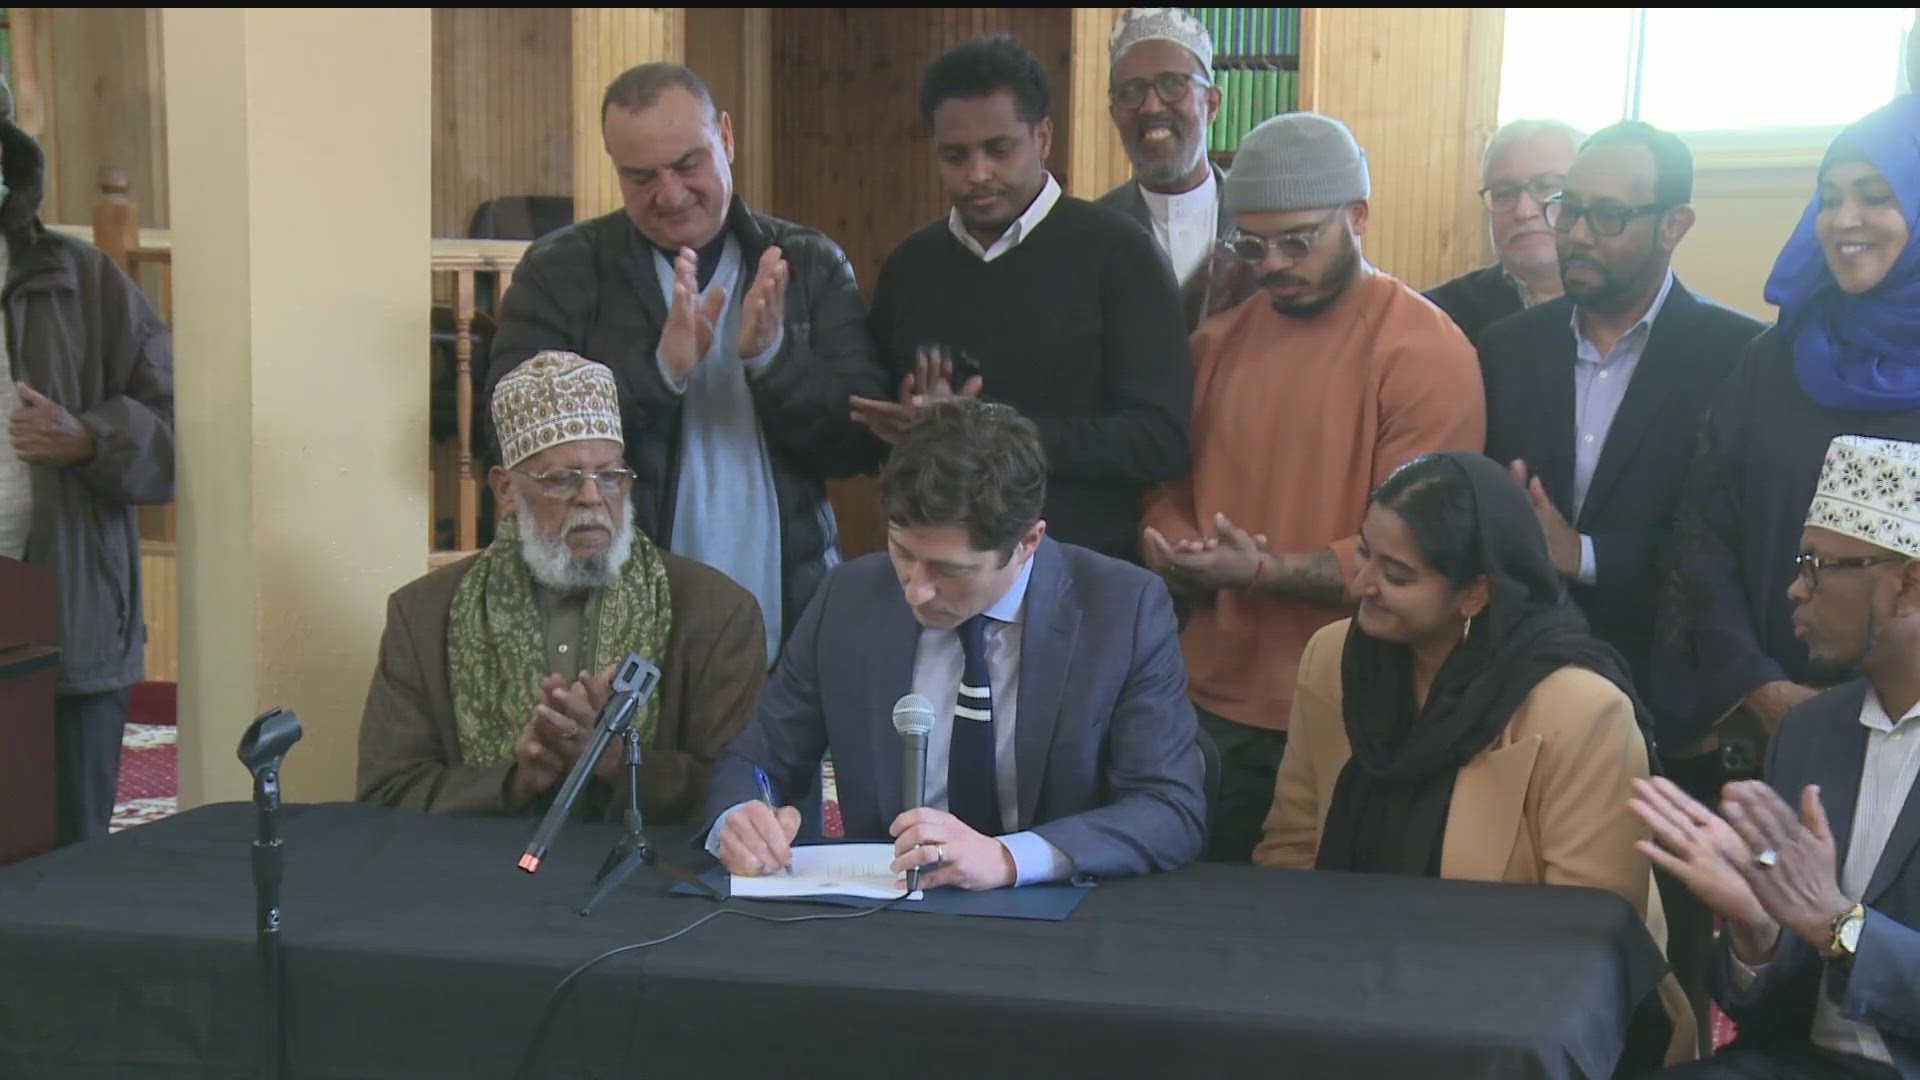 With Mayor Jacob Frey's signature, Minneapolis became the only major city in the United States to allow the Islamic call to prayer to be broadcast five times a day.